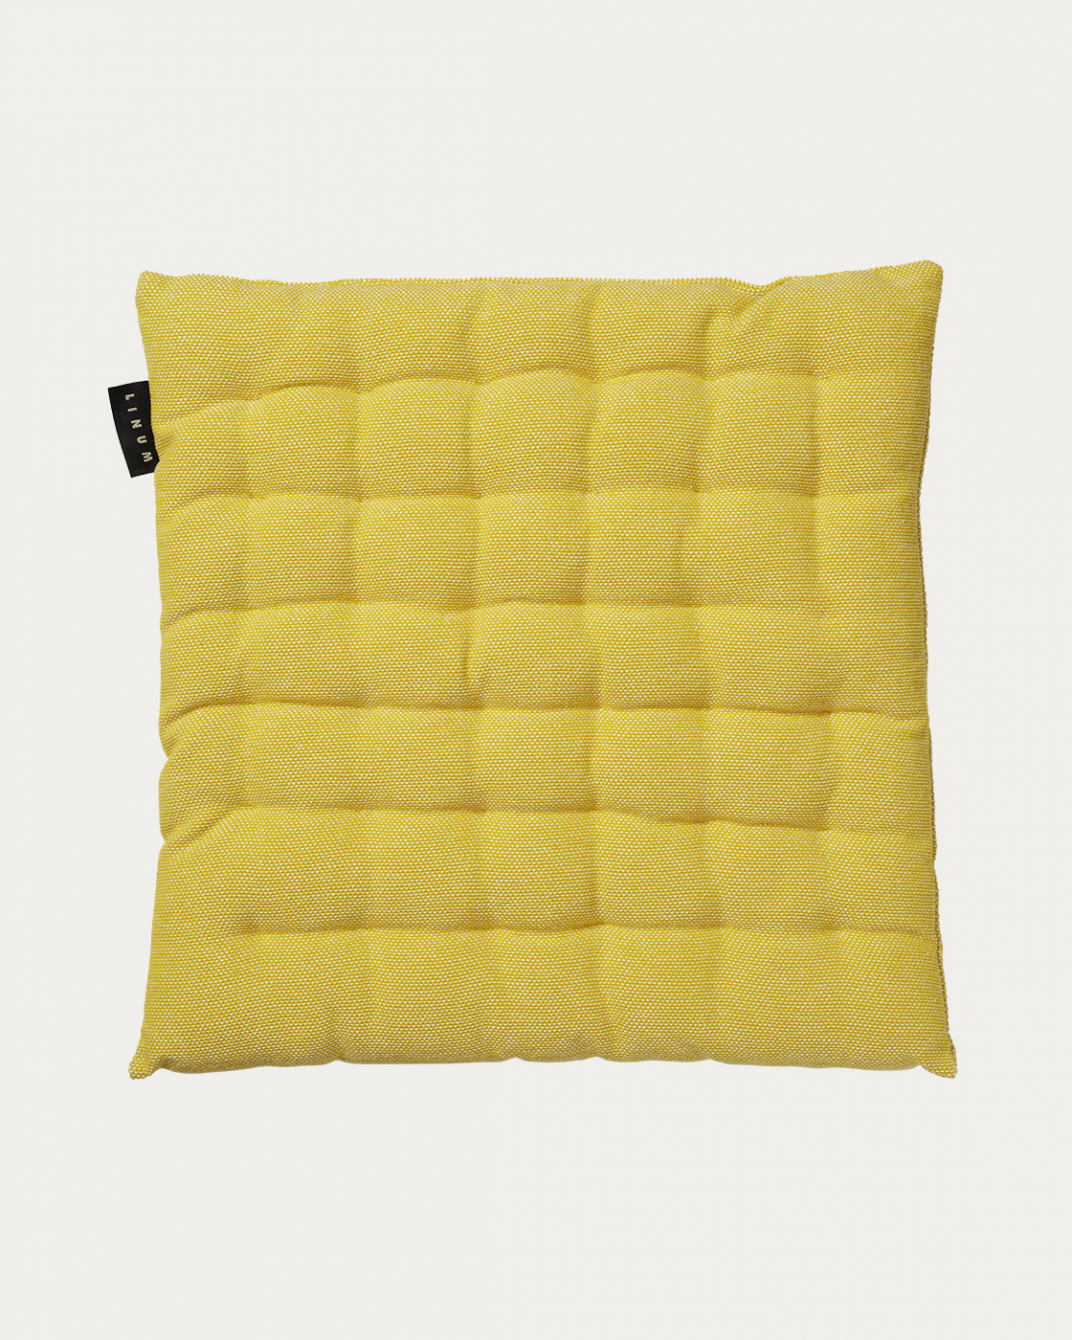 Product image mustard yellow PEPPER seat cushion made of soft cotton with recycled polyester filling from LINUM DESIGN. Size 40x40 cm.